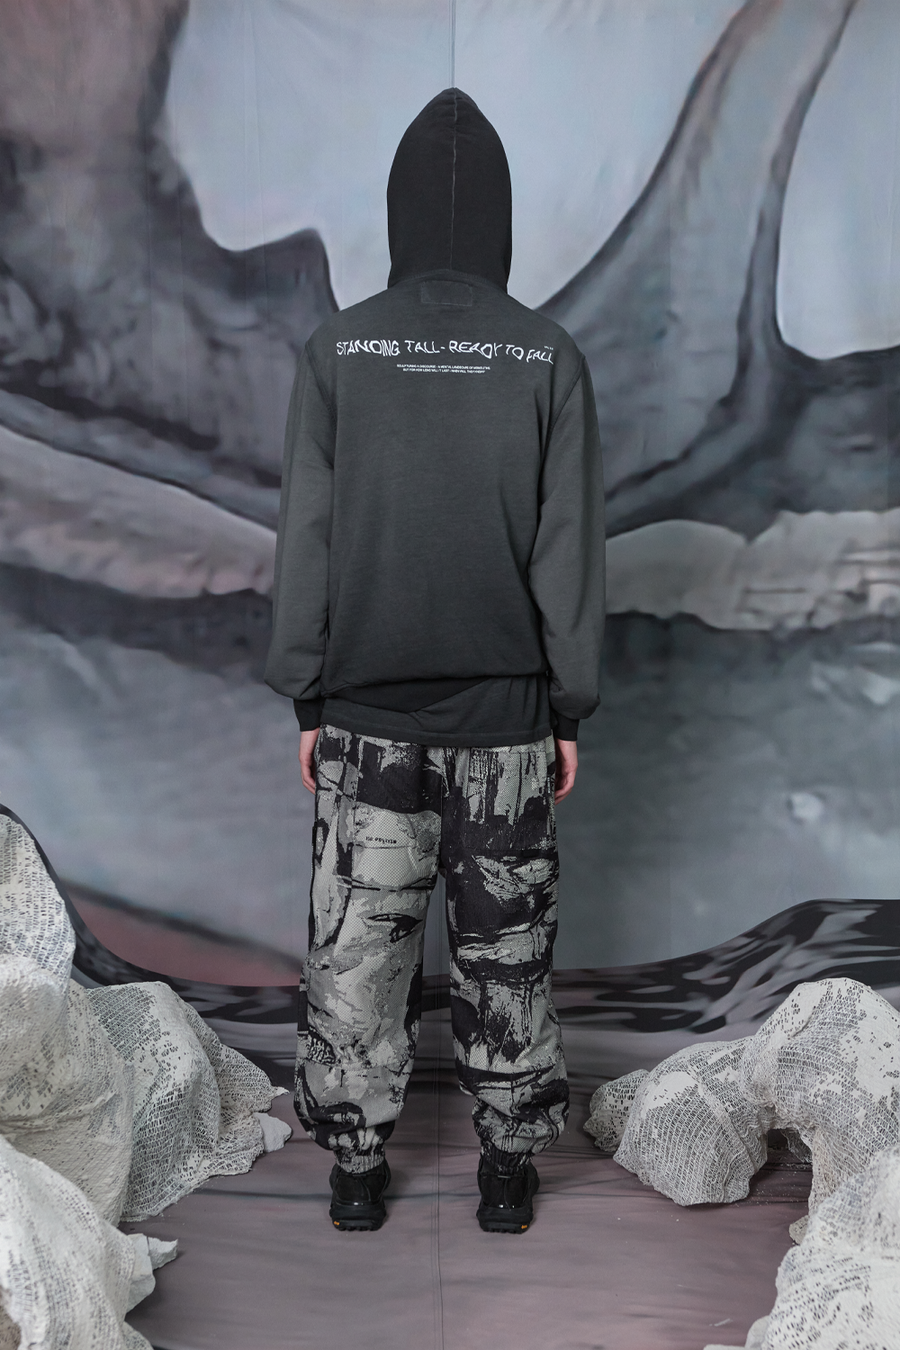 Buy the Iso Poetism Gibra Hoodie W/ Serigraphy Front/Back Print in Grey at Intro. Spend £100 for free UK delivery. Official stockists. We ship worldwide.